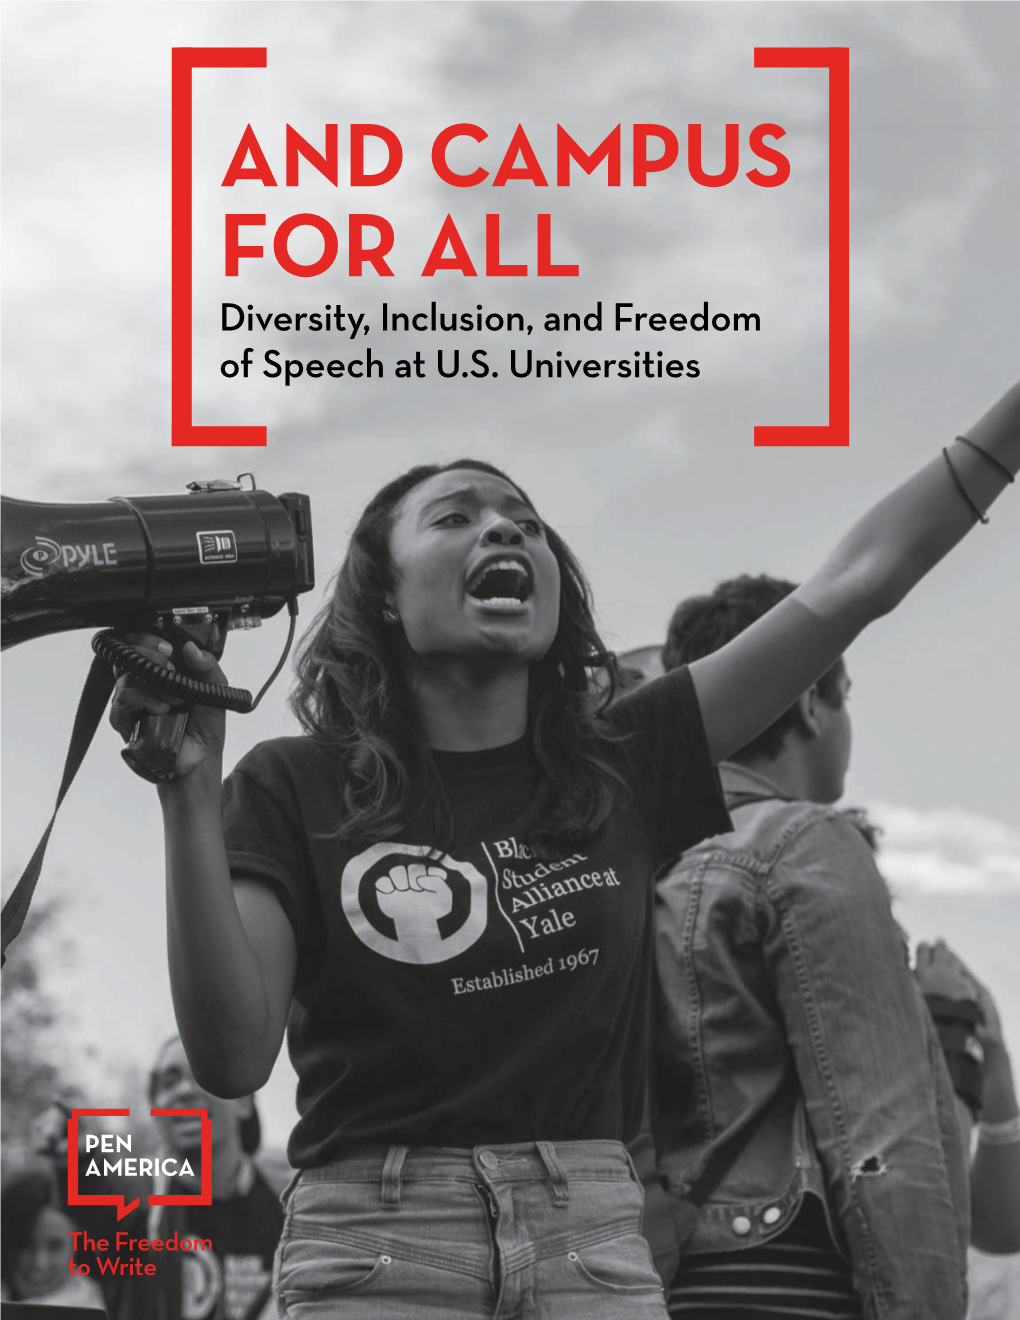 Diversity, Inclusion, and Freedom of Speech at US Universities